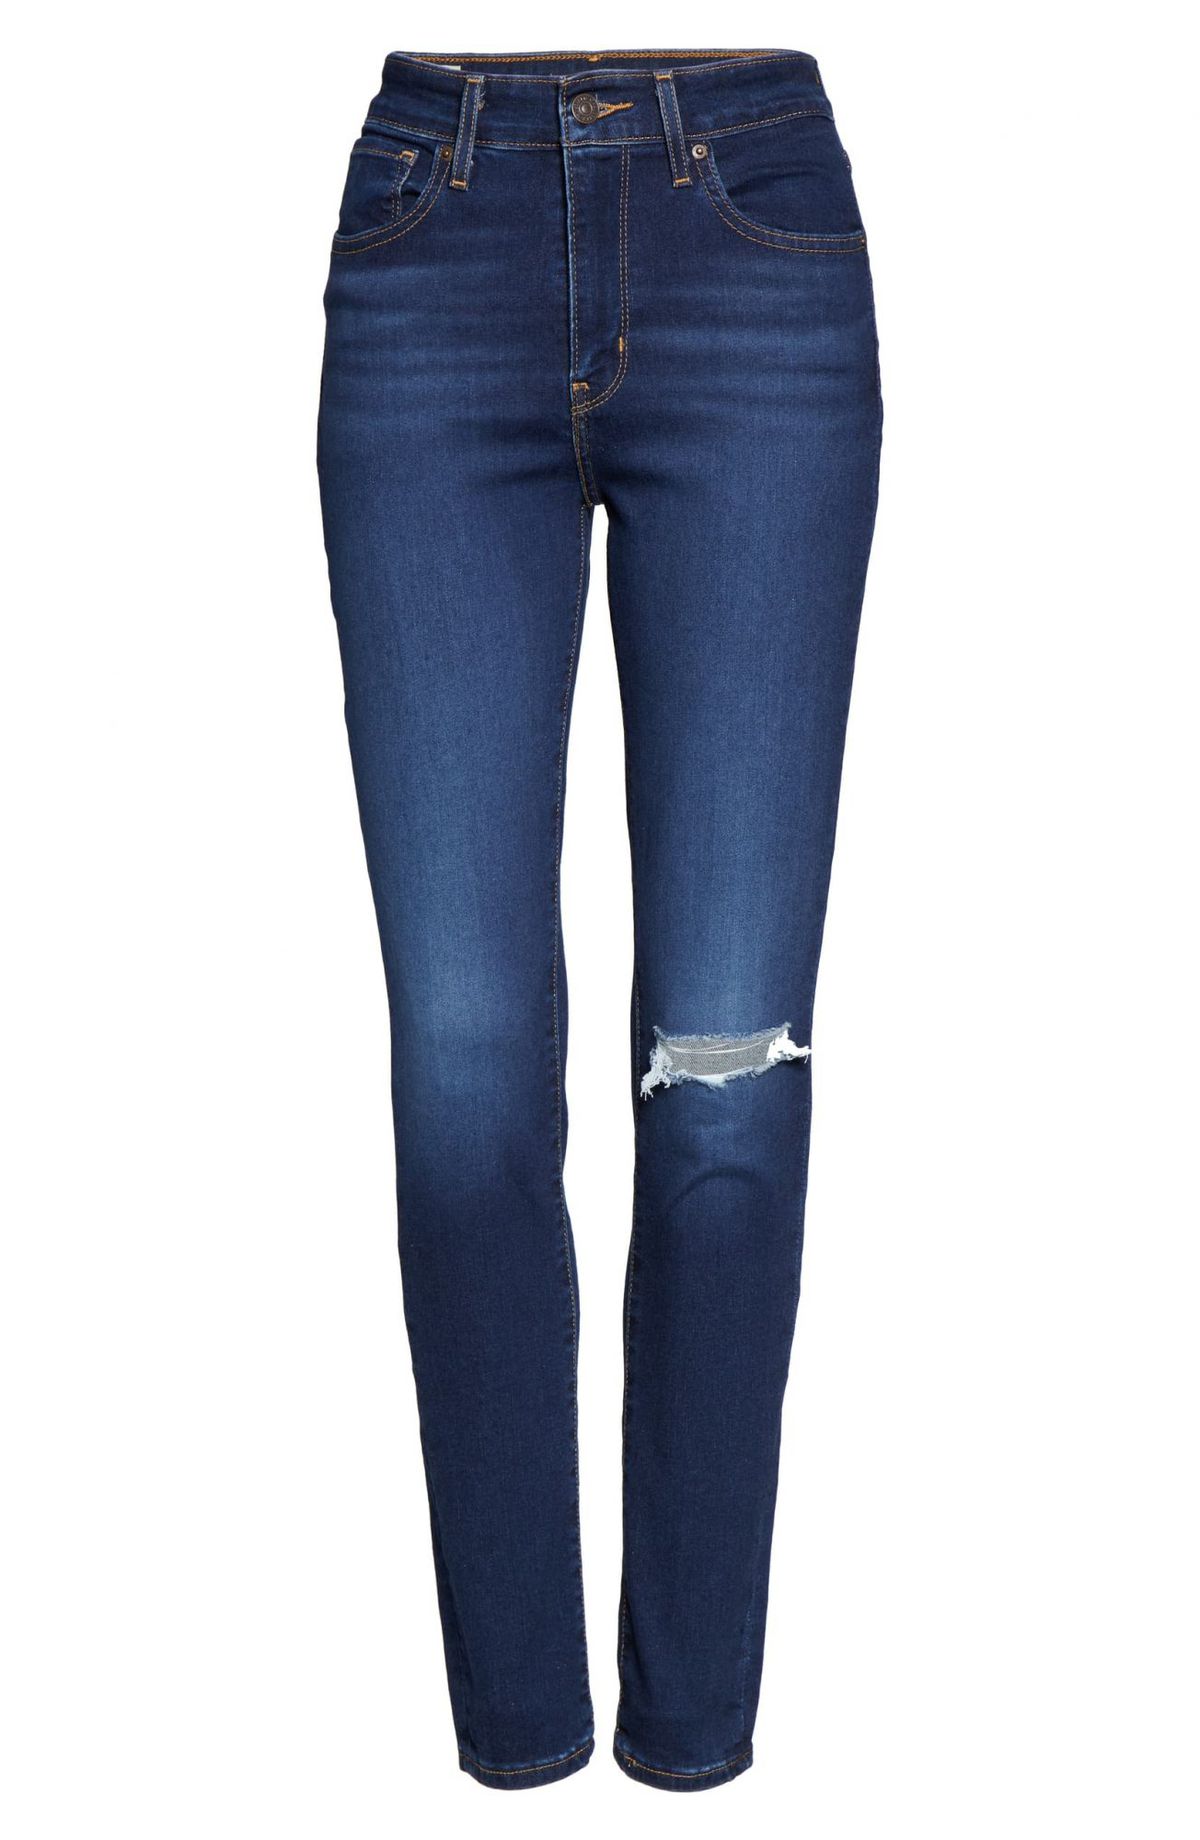 Nordstrom Black Friday Sale 2019 Levi's 721 Ripped High Waist Skinny Jean